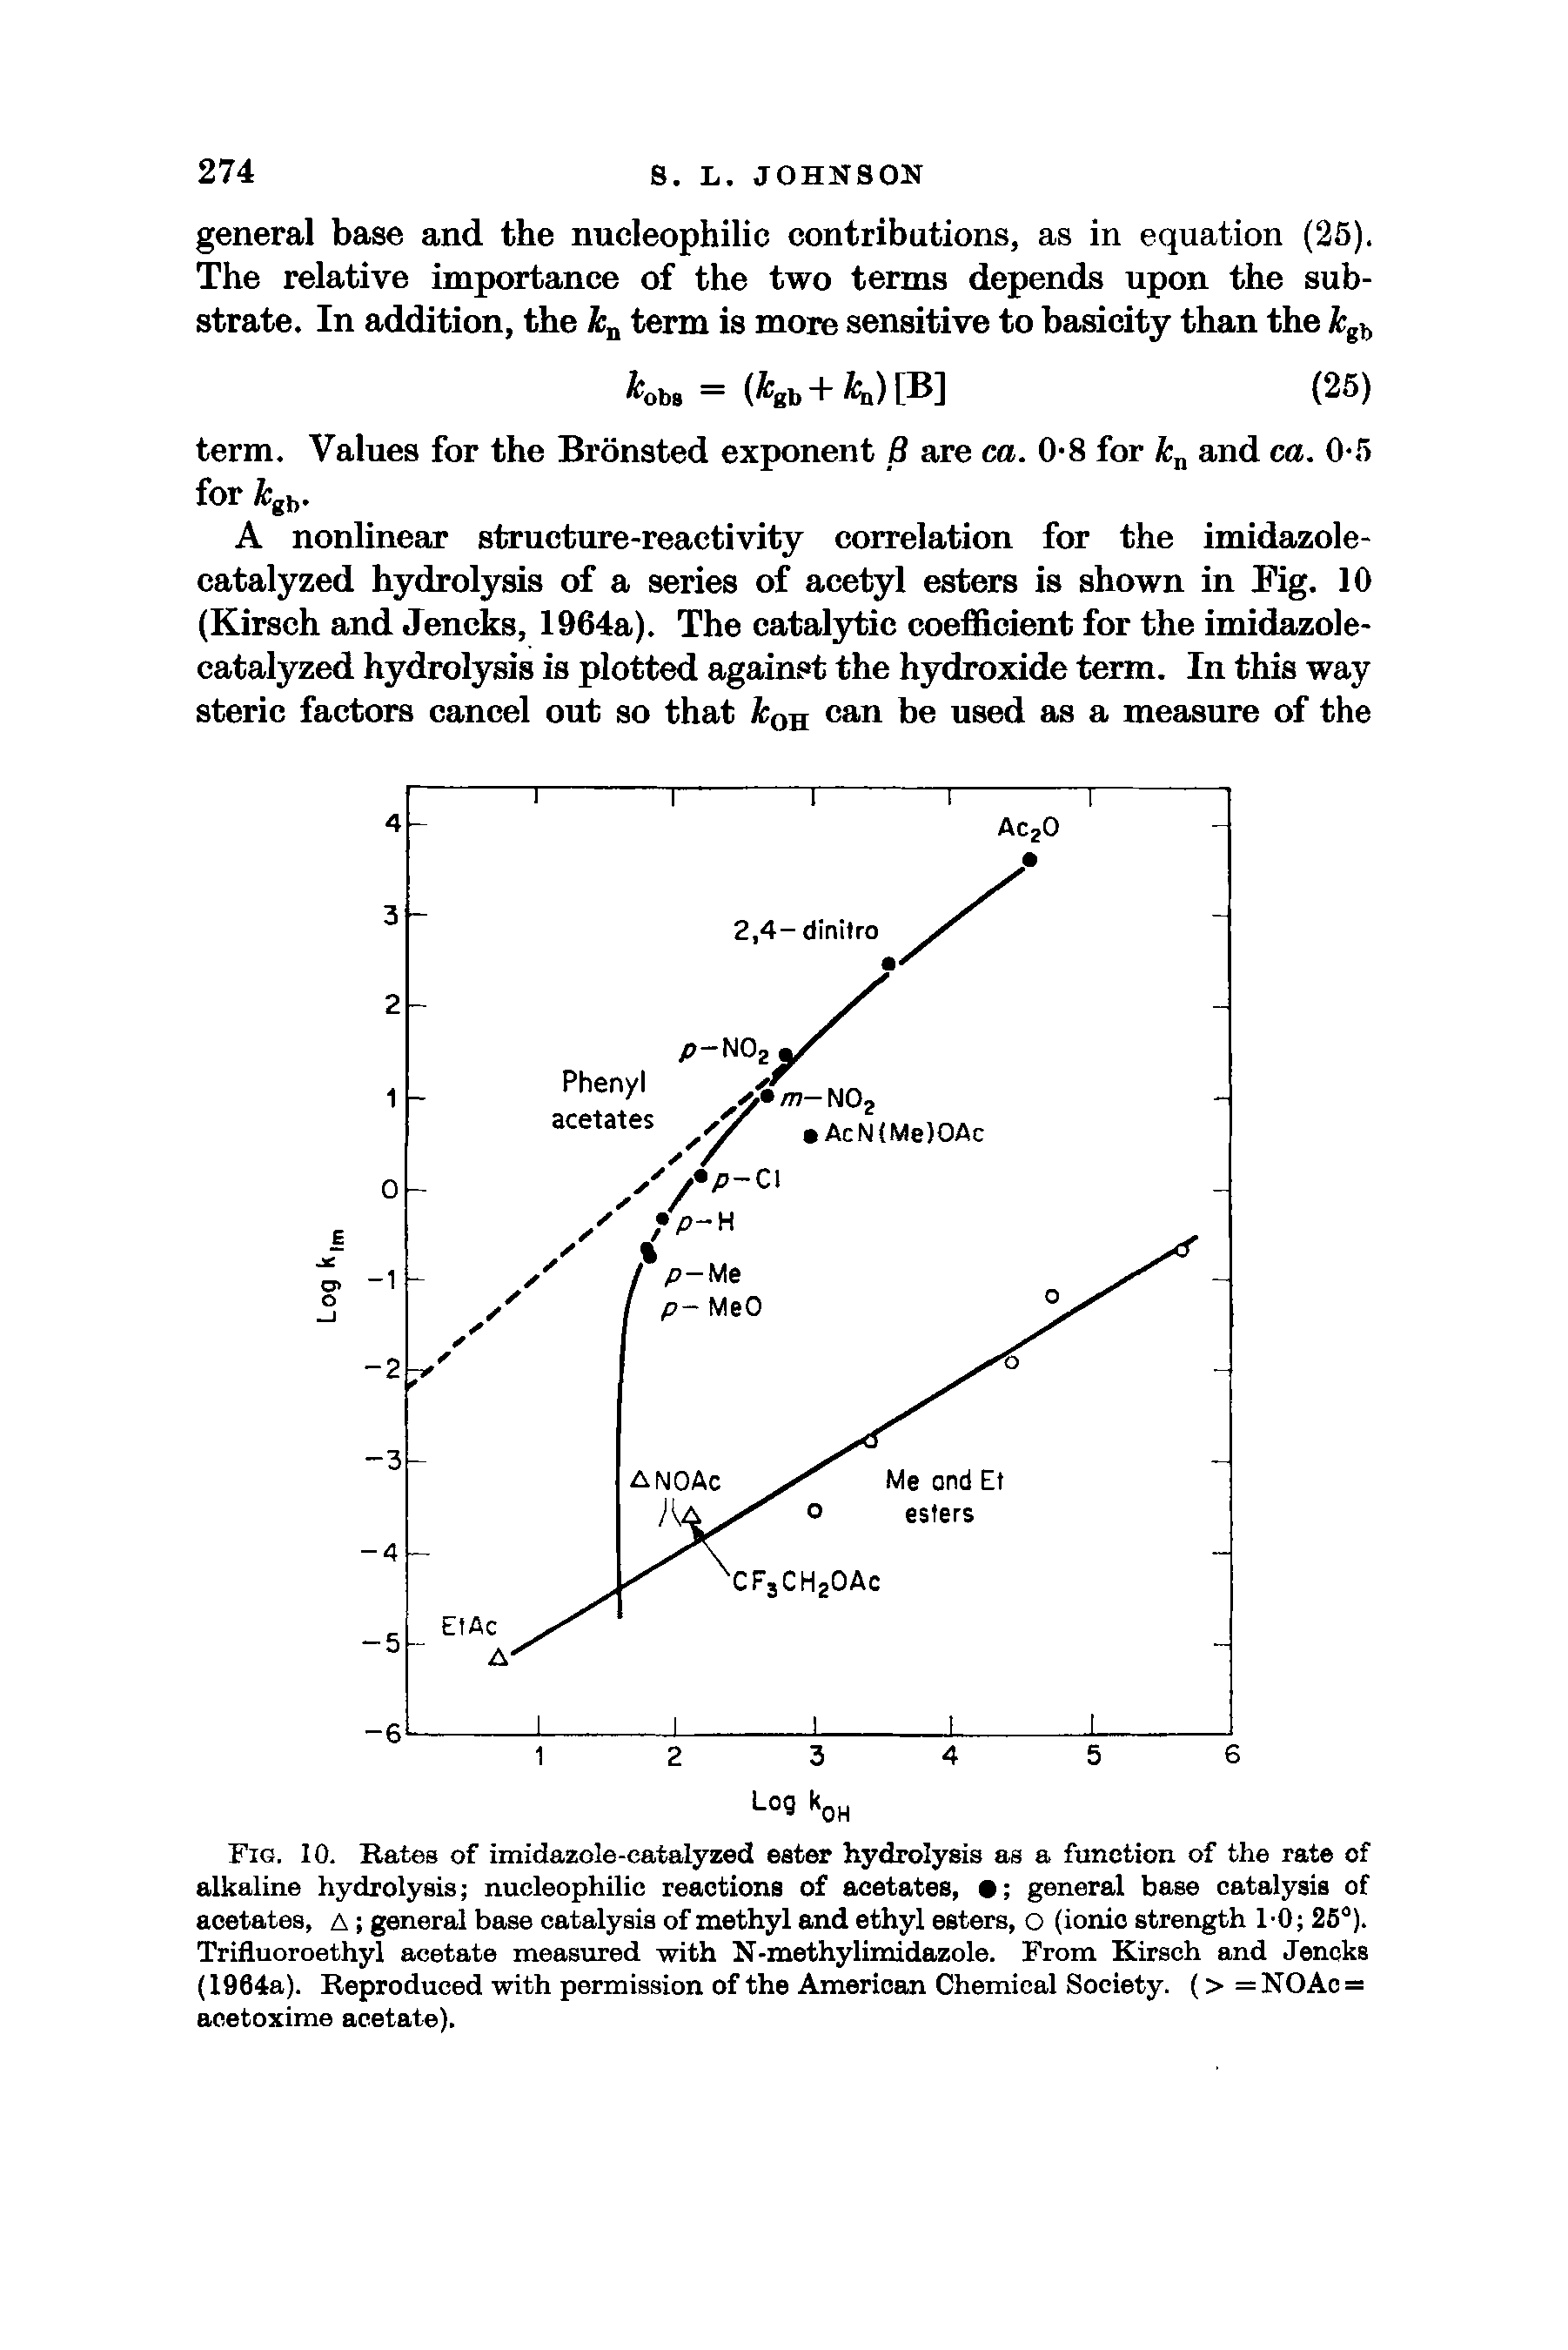 Fig. 10. Rates of imidazole-catalyzed ester hydrolysis as a function of the rate of alkaline hydrolysis nucleophilic reactions of acetates, general base catalysis of acetates, a general base catalysis of methyl and ethyl esters, o (ionic strength 1-0 25°). Trifluoroethyl acetate measured with N-methylimidazole. From Kirsch and Jencks (1964a). Reproduced with permission of the American Chemical Society. (> = NOAc = acetoxime acetate).